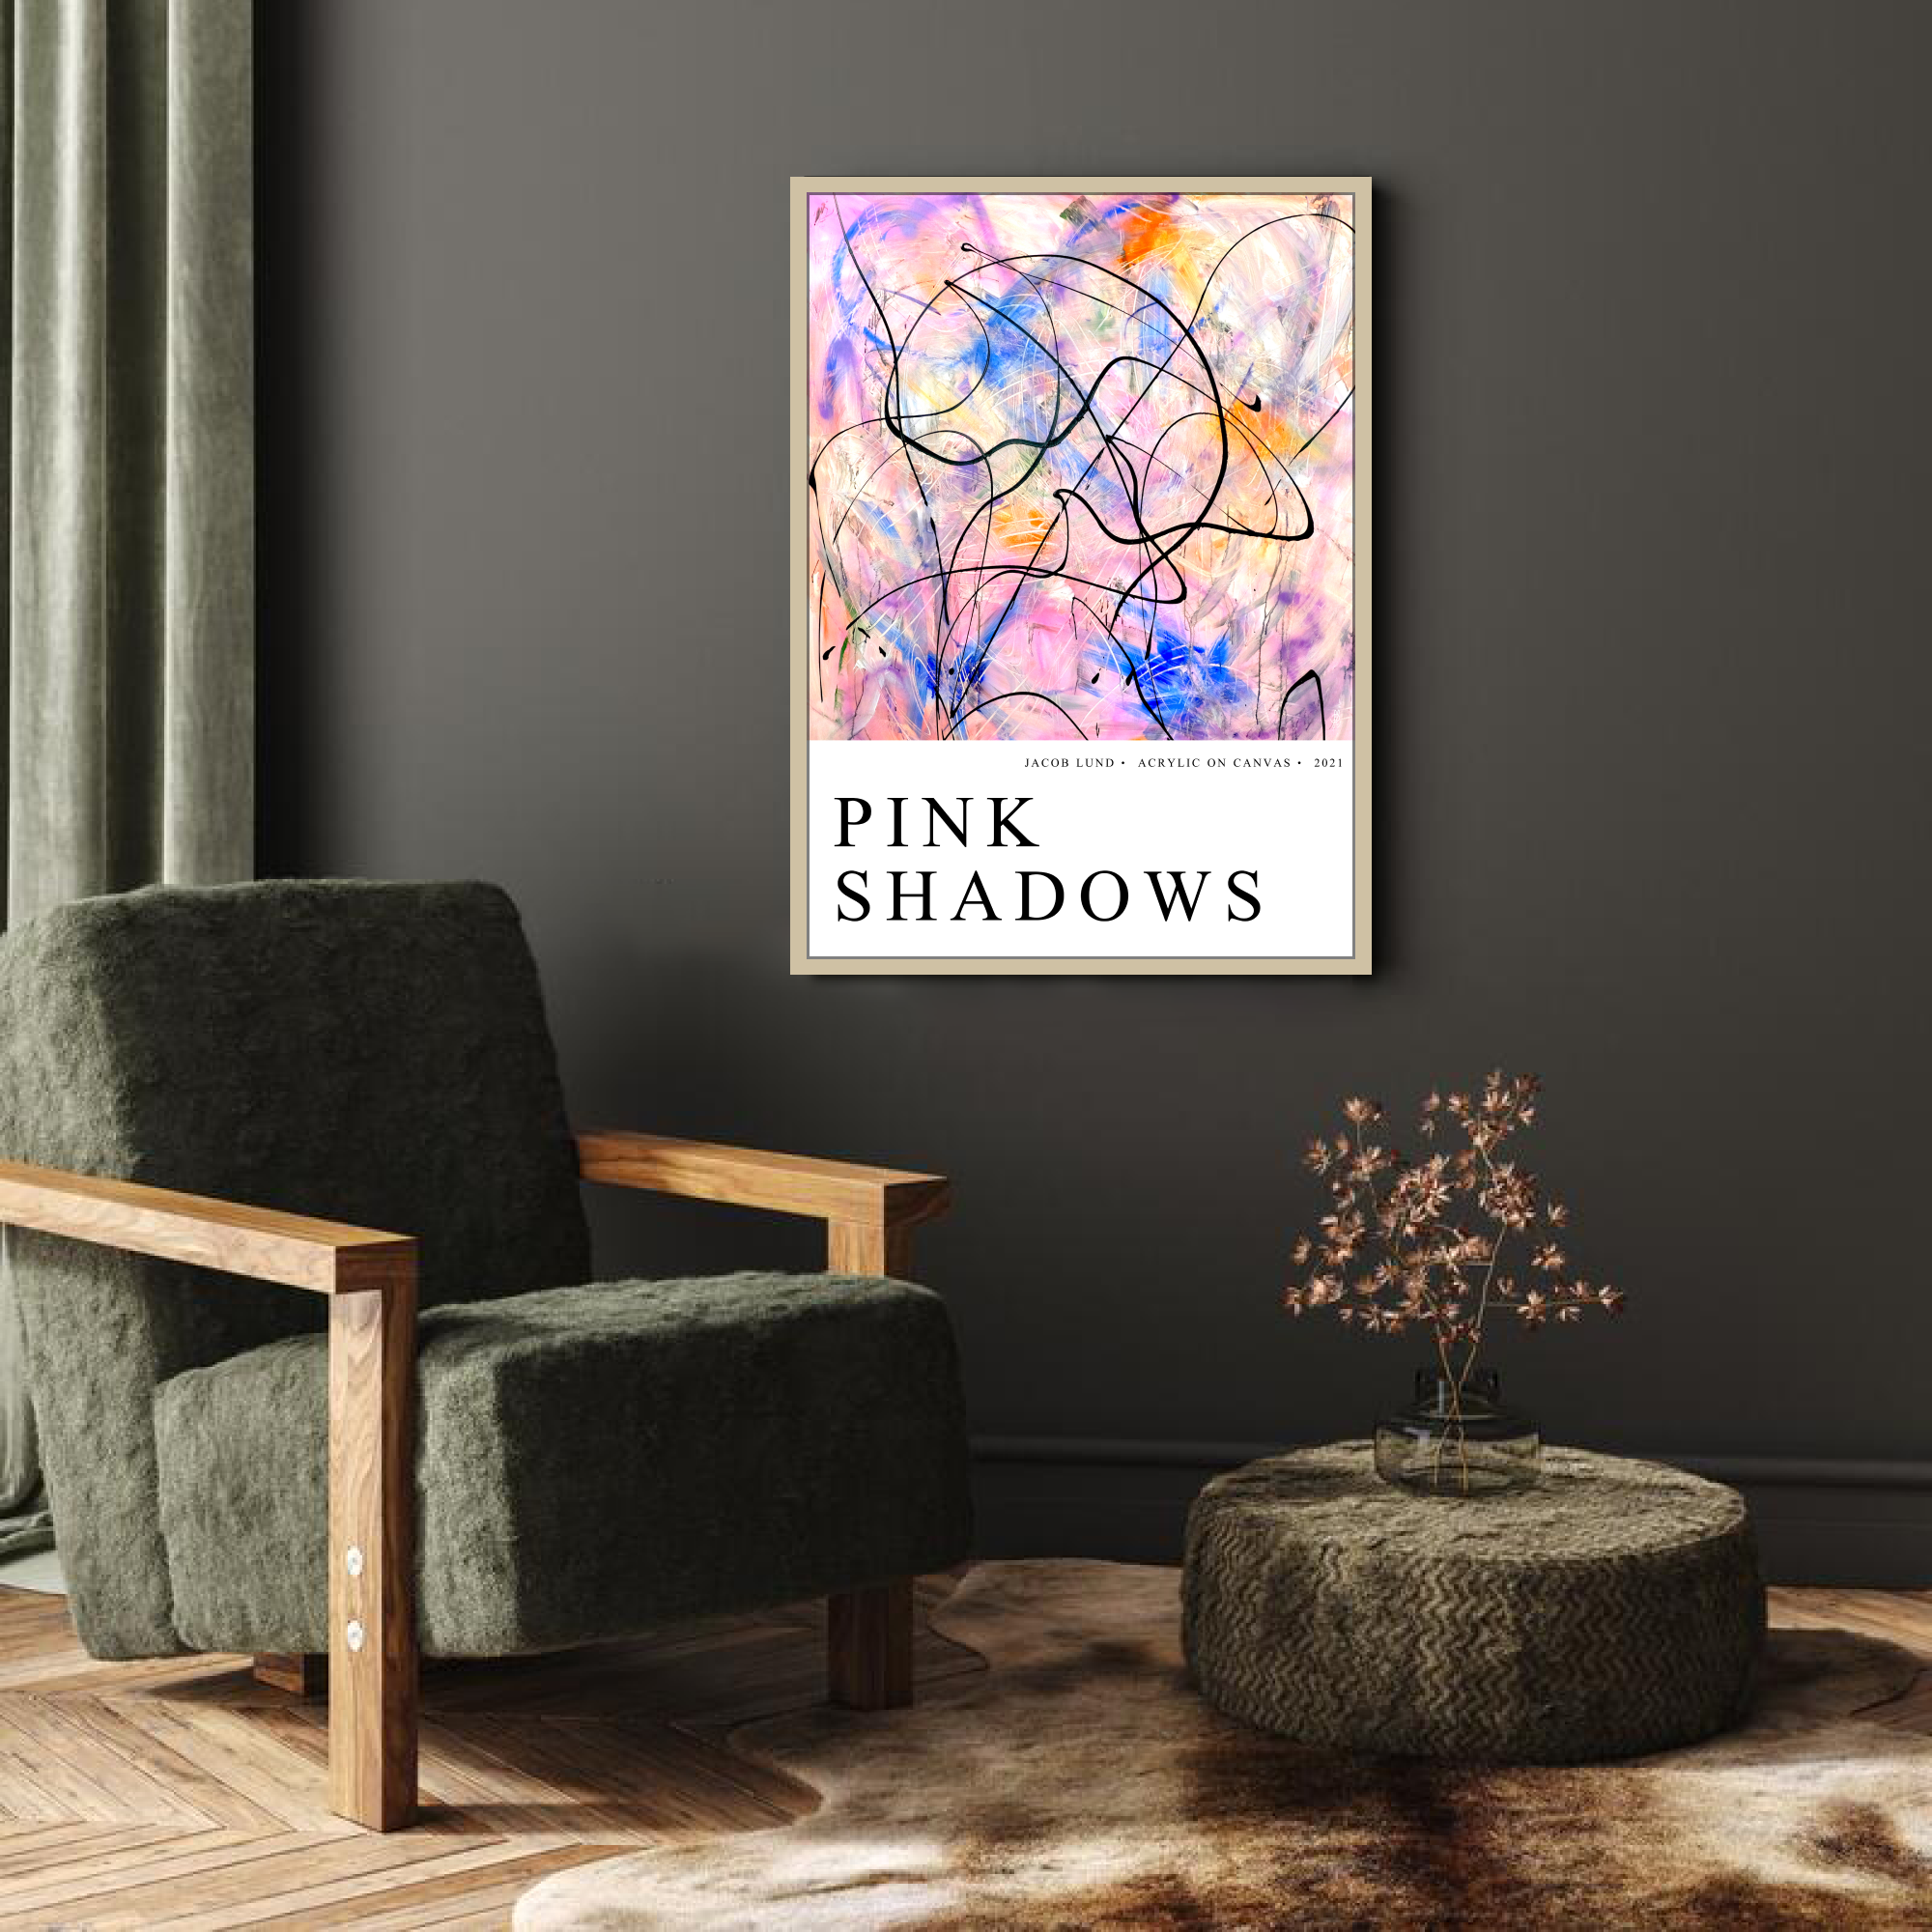 Poster: "Pink Shadows" (White background)